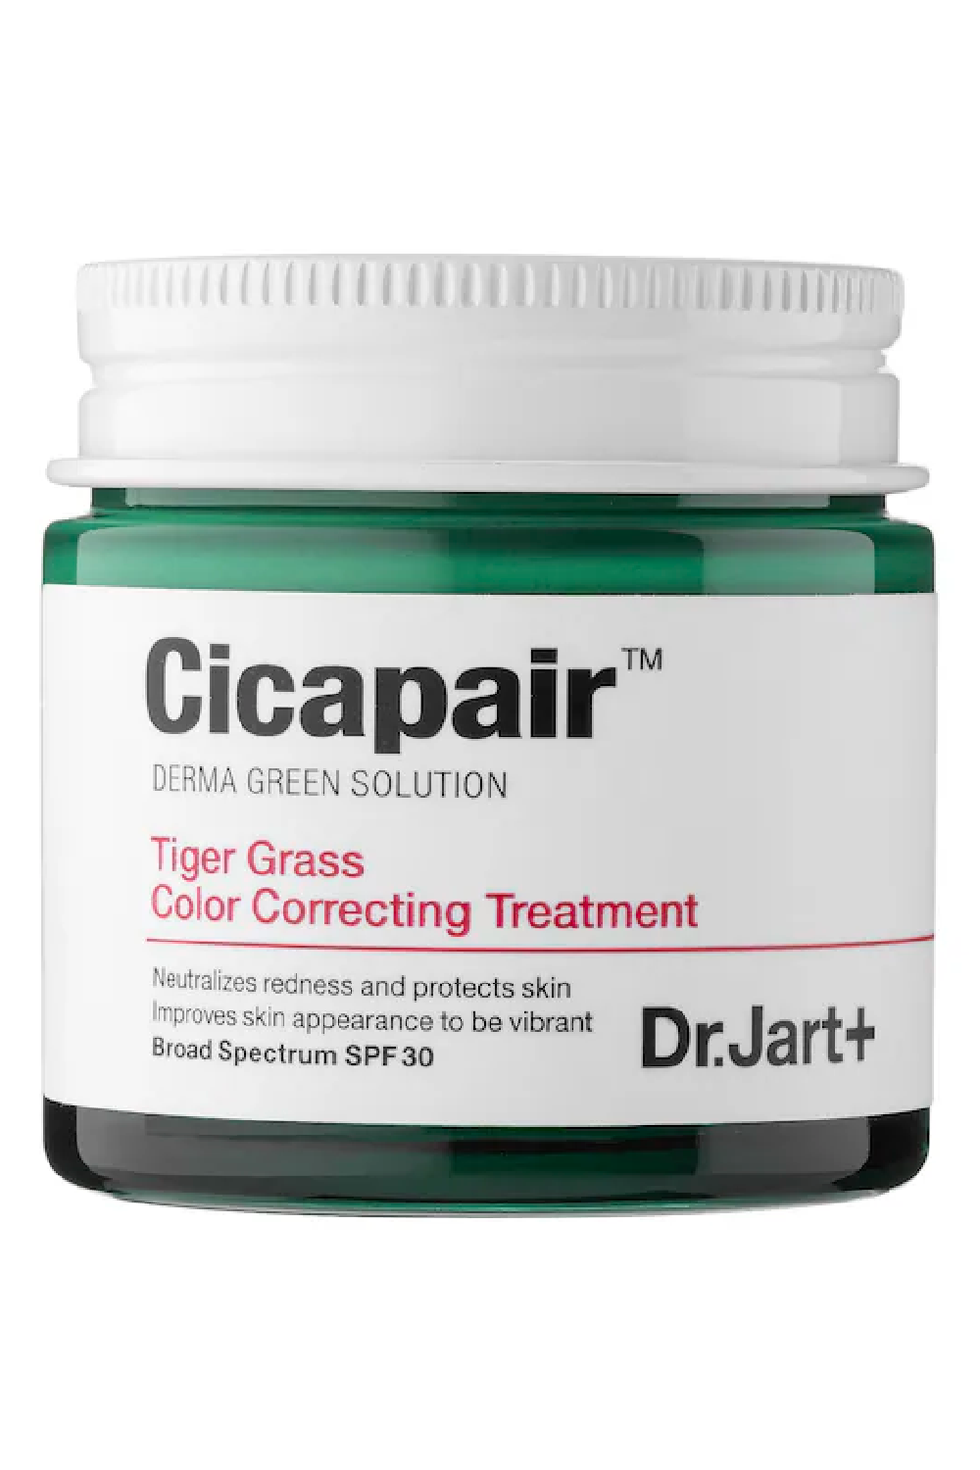 Cicapair™ Tiger Grass Color Correcting Treatment SPF 30